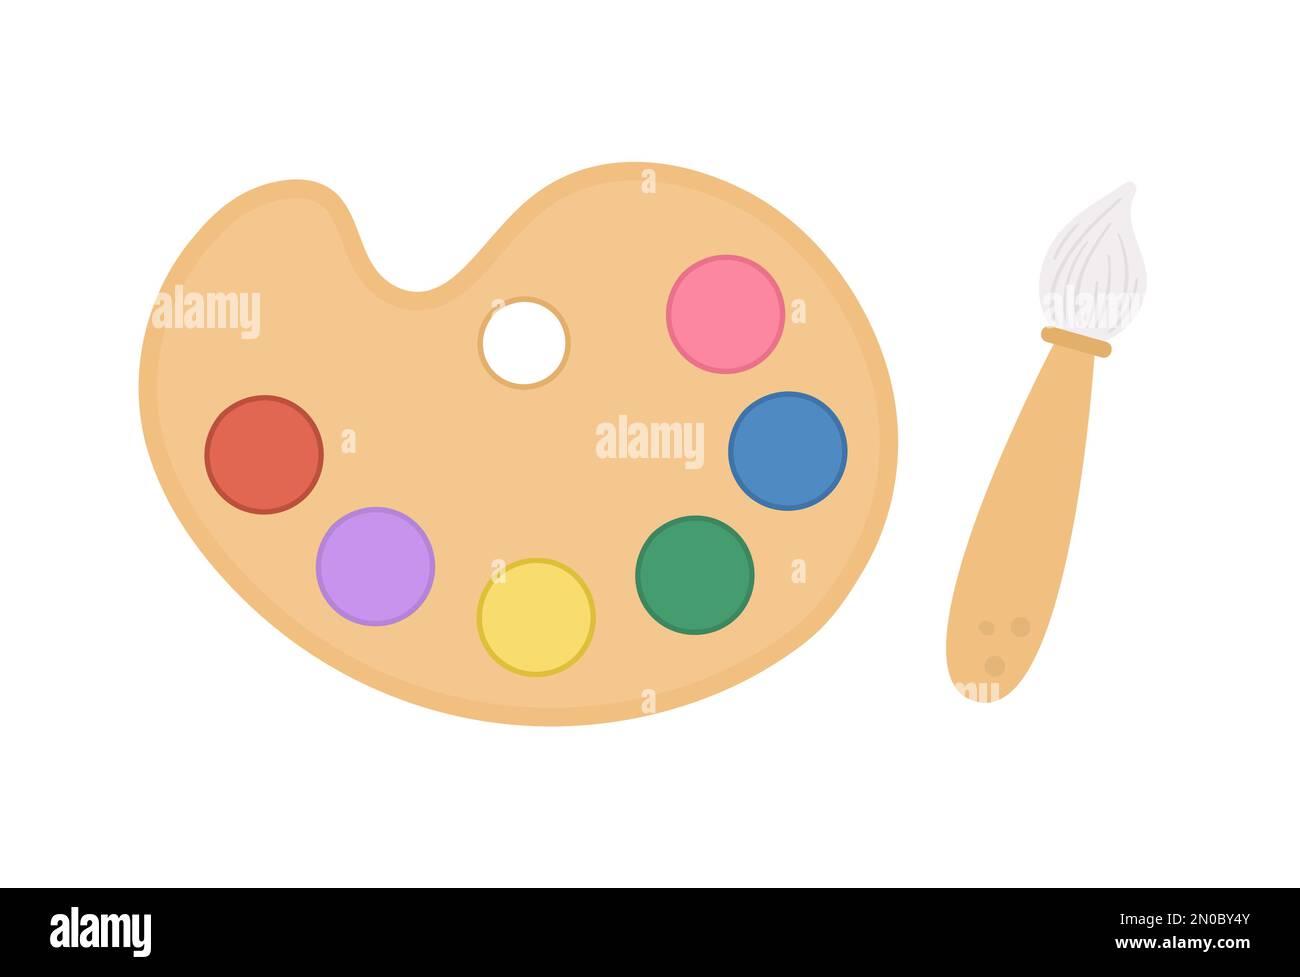 Artist palette icon with colored paints on white background